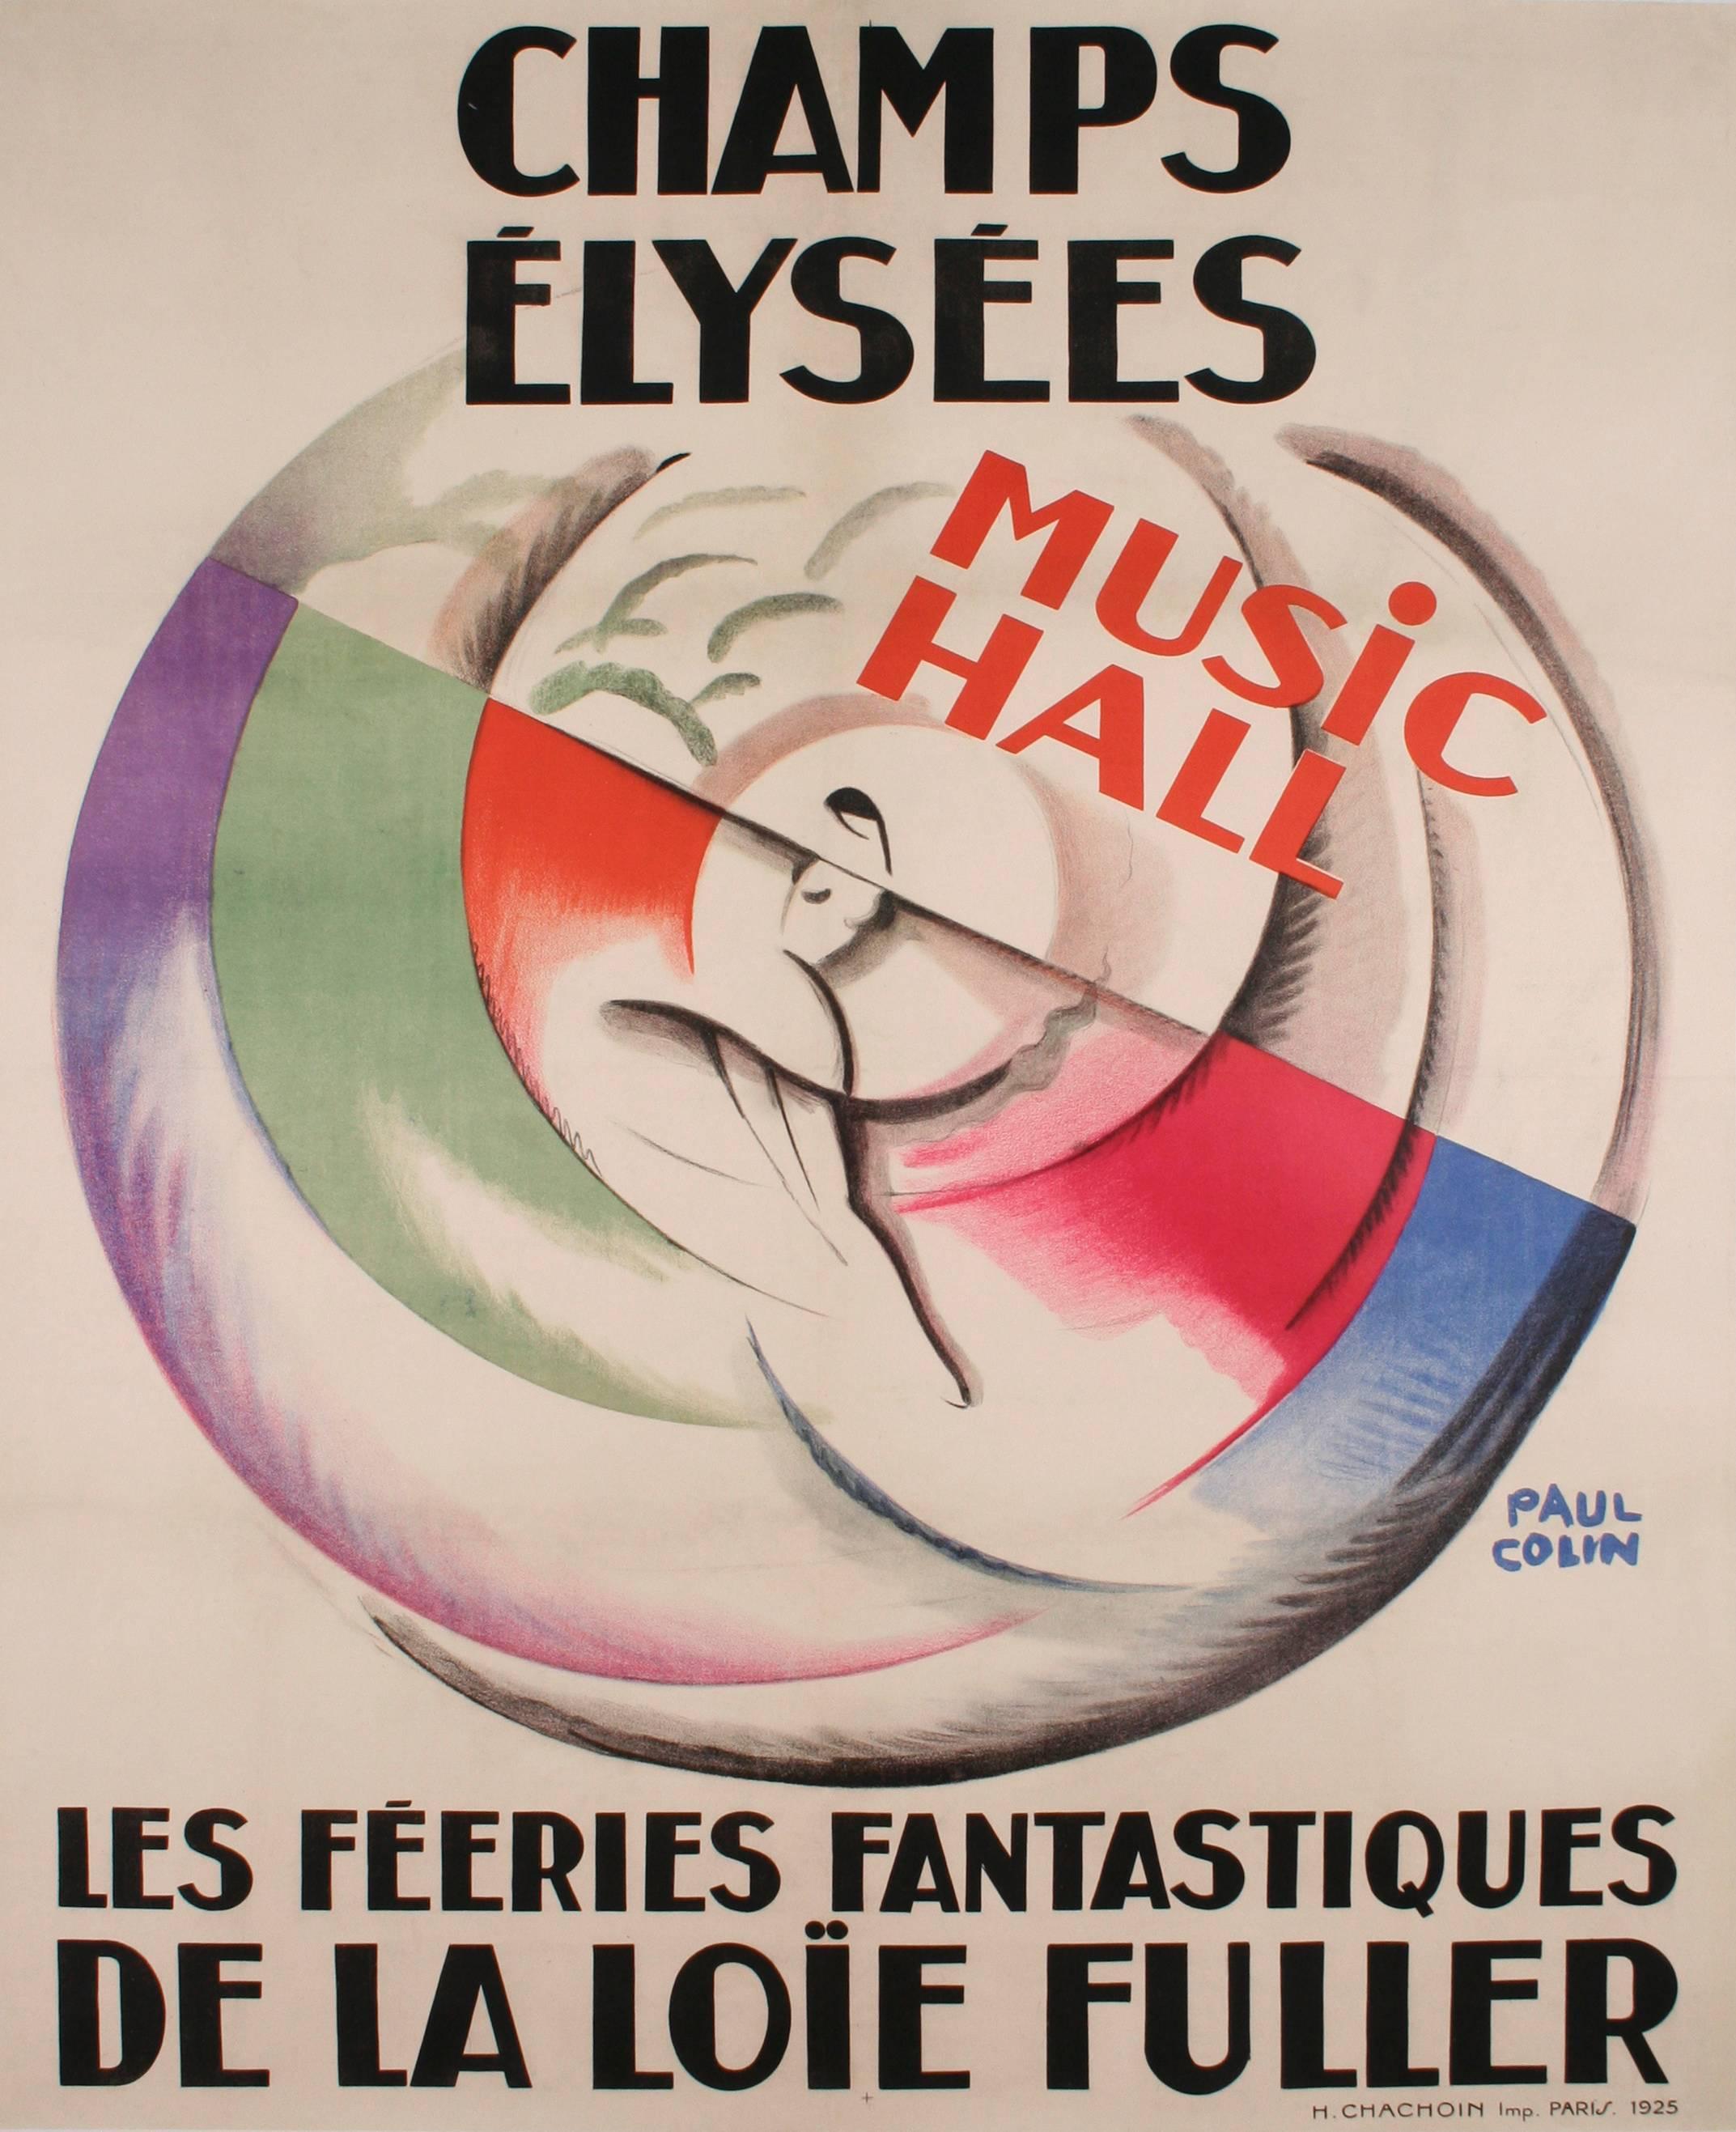 A rare piece by the French Art Deco period master poster artist Paul Colin, 1925. This is an advertisement for the dancer Loie Fuller's last performance at the Champs Elysees Music Hall; she was 68 at the time.